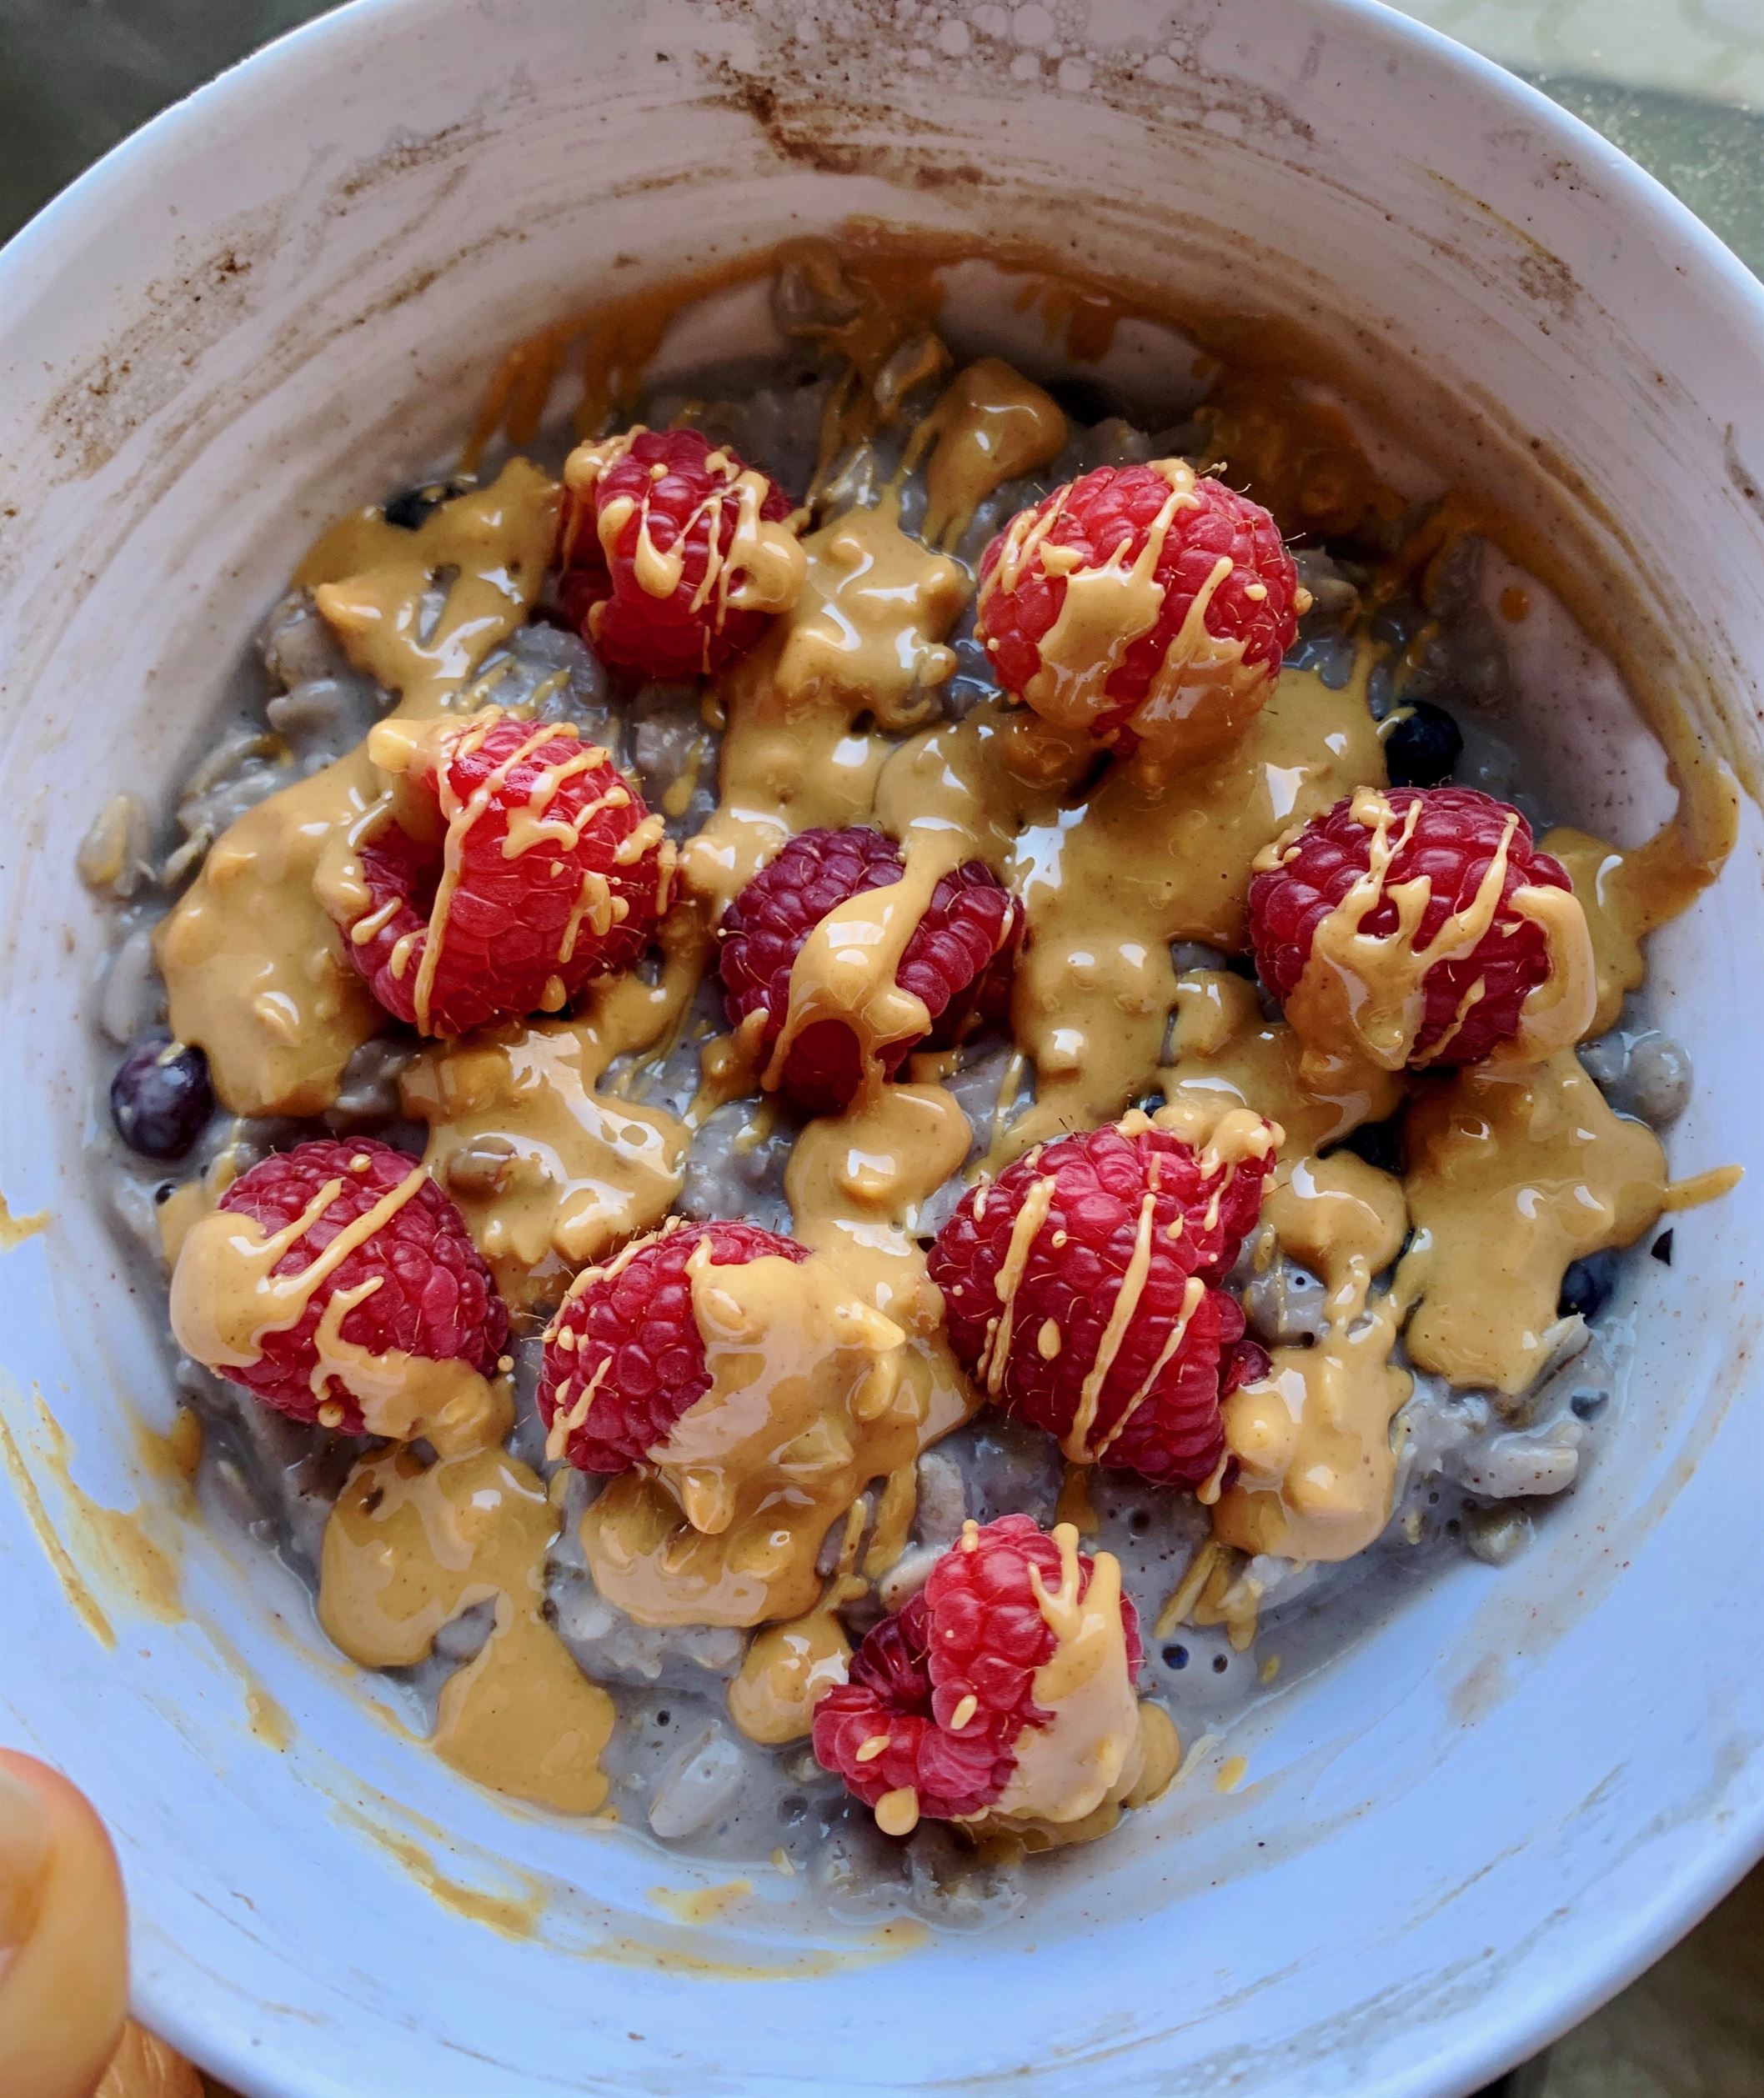 This is an oatmeal bowl the "Gourmet Bailey" way, topped with crunchy peanut butter and fresh raspberries. Samantha Bailey | The Montclarion